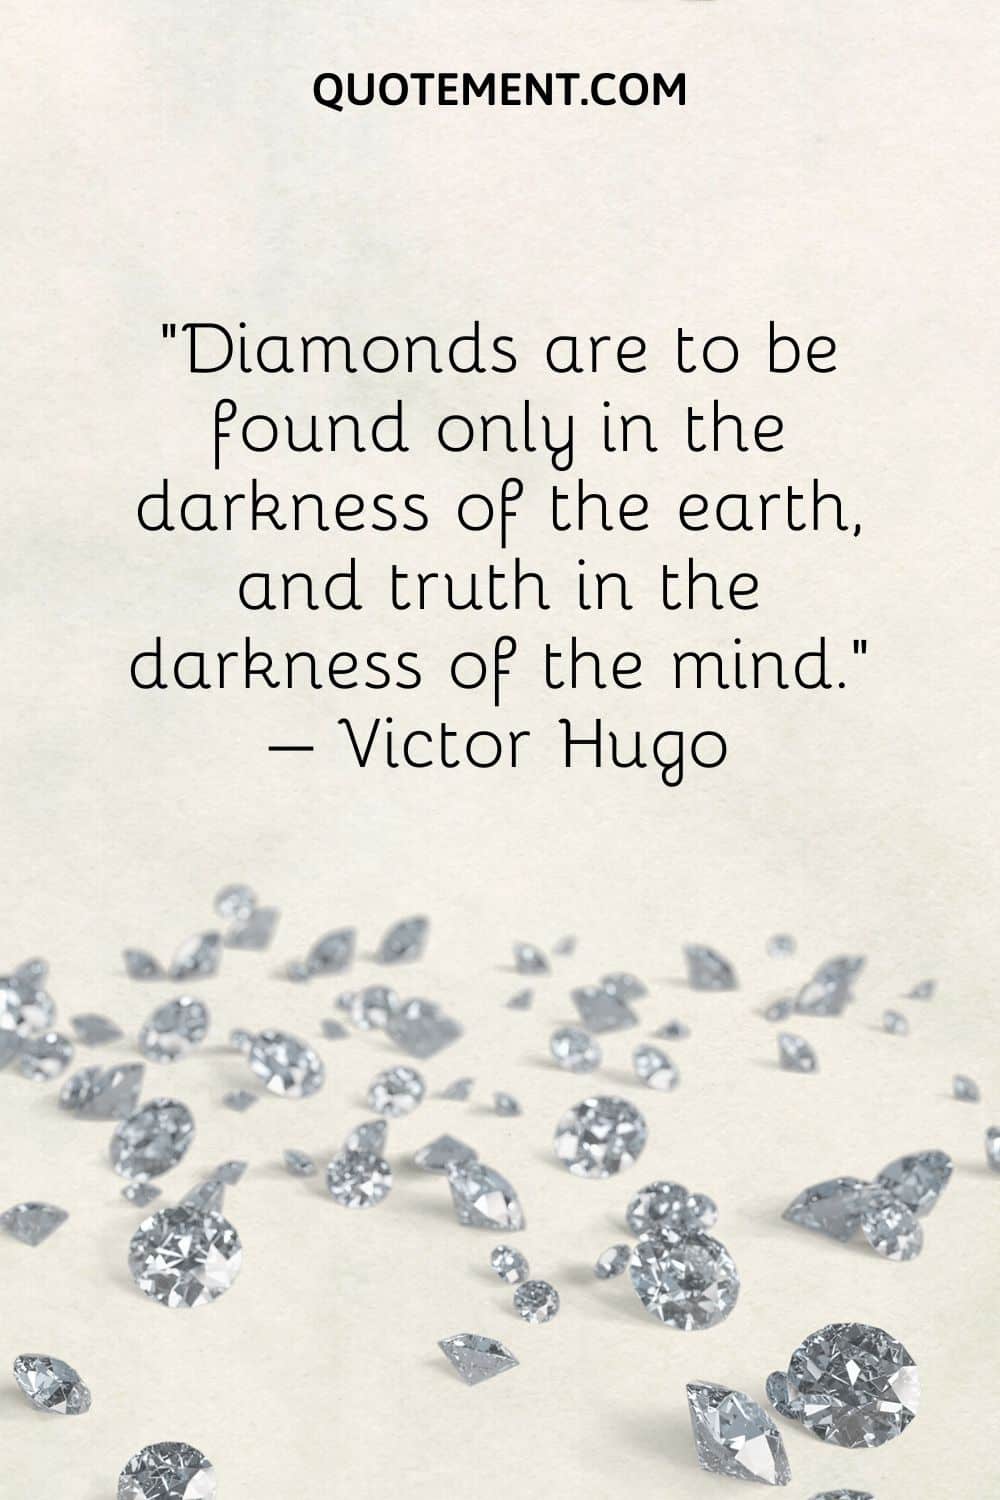 Diamonds are to be found only in the darkness of the earth, and truth in the darkness of the mind.